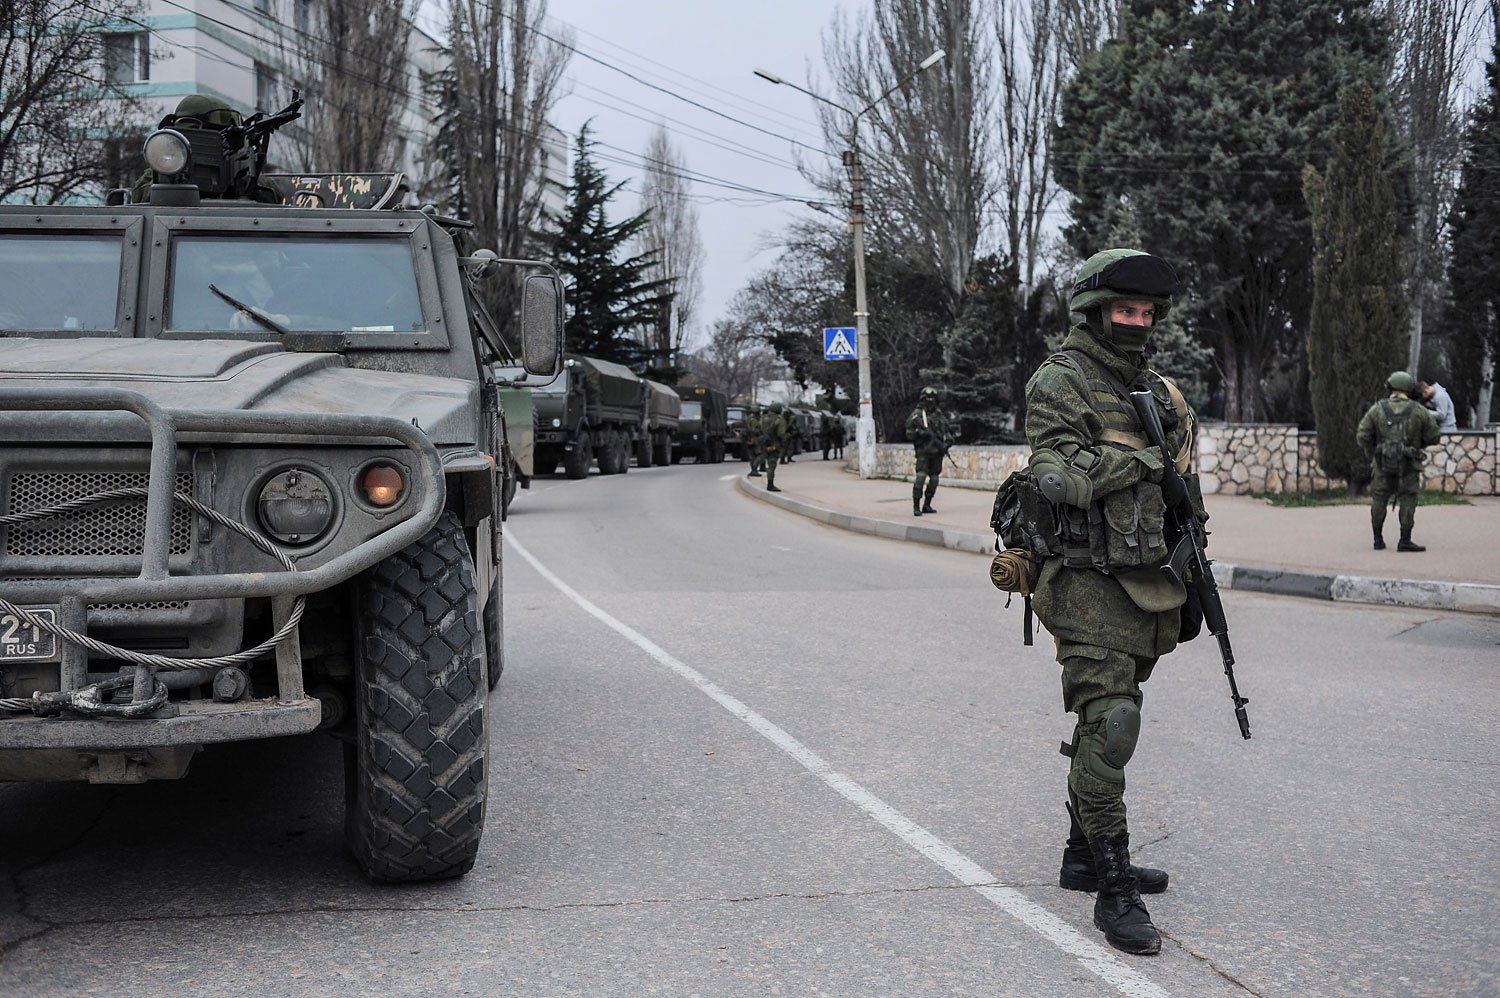 Troops in unmarked uniforms stand guard in Balaklava on the outskirts of Sevastopol, Ukraine, Saturday, March 1, 2014.